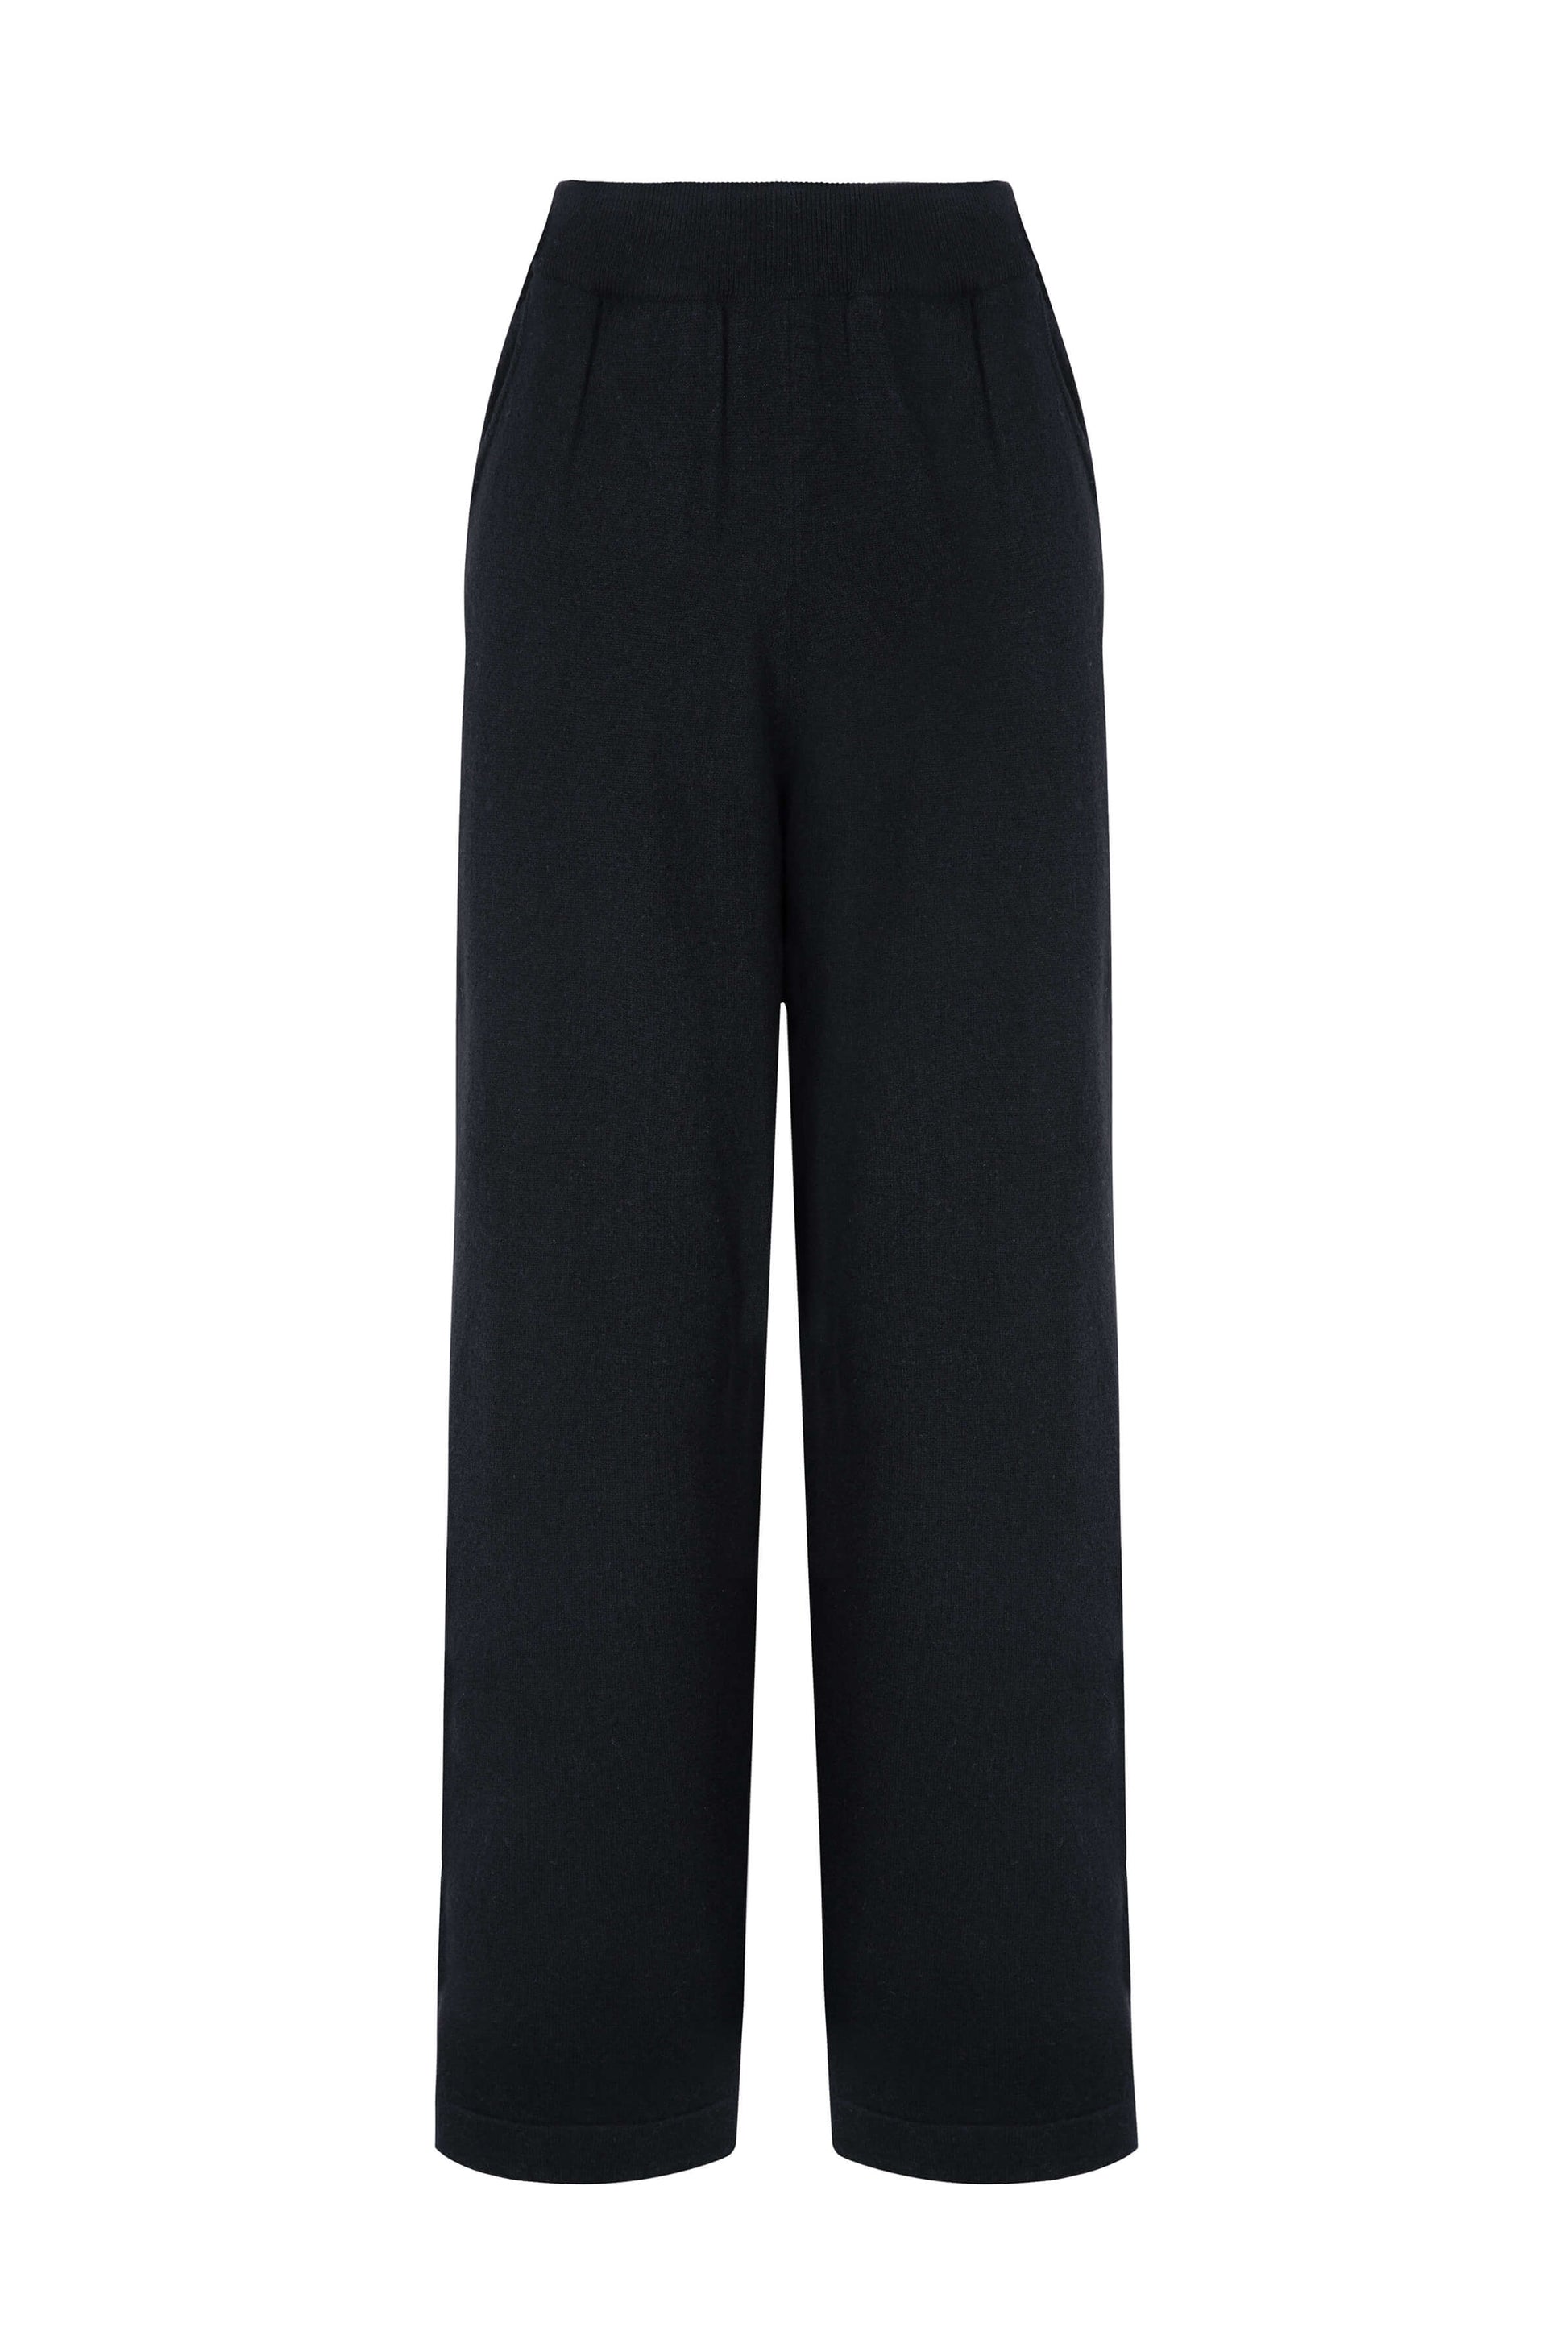 Johnstons of Elgin Knitted Cashmere Women's High Rise Wide Leg Trousers in Black on a grey background KBP00926SA7099